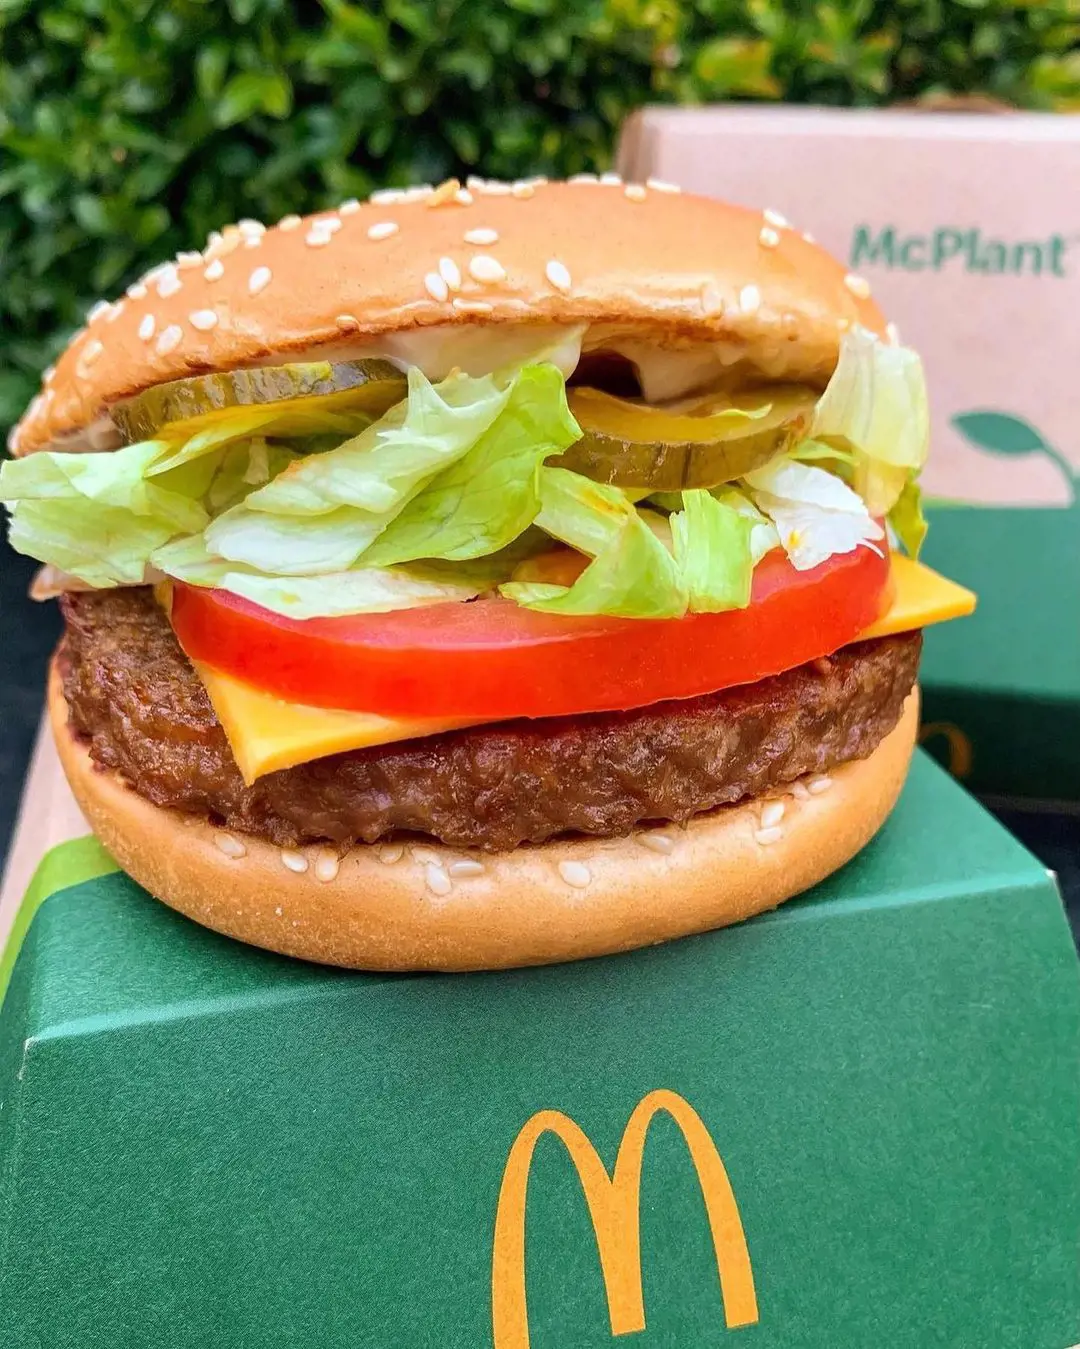 Mcdonald's UK introduced a healthier version of the world famous burger, McPlant in 2022